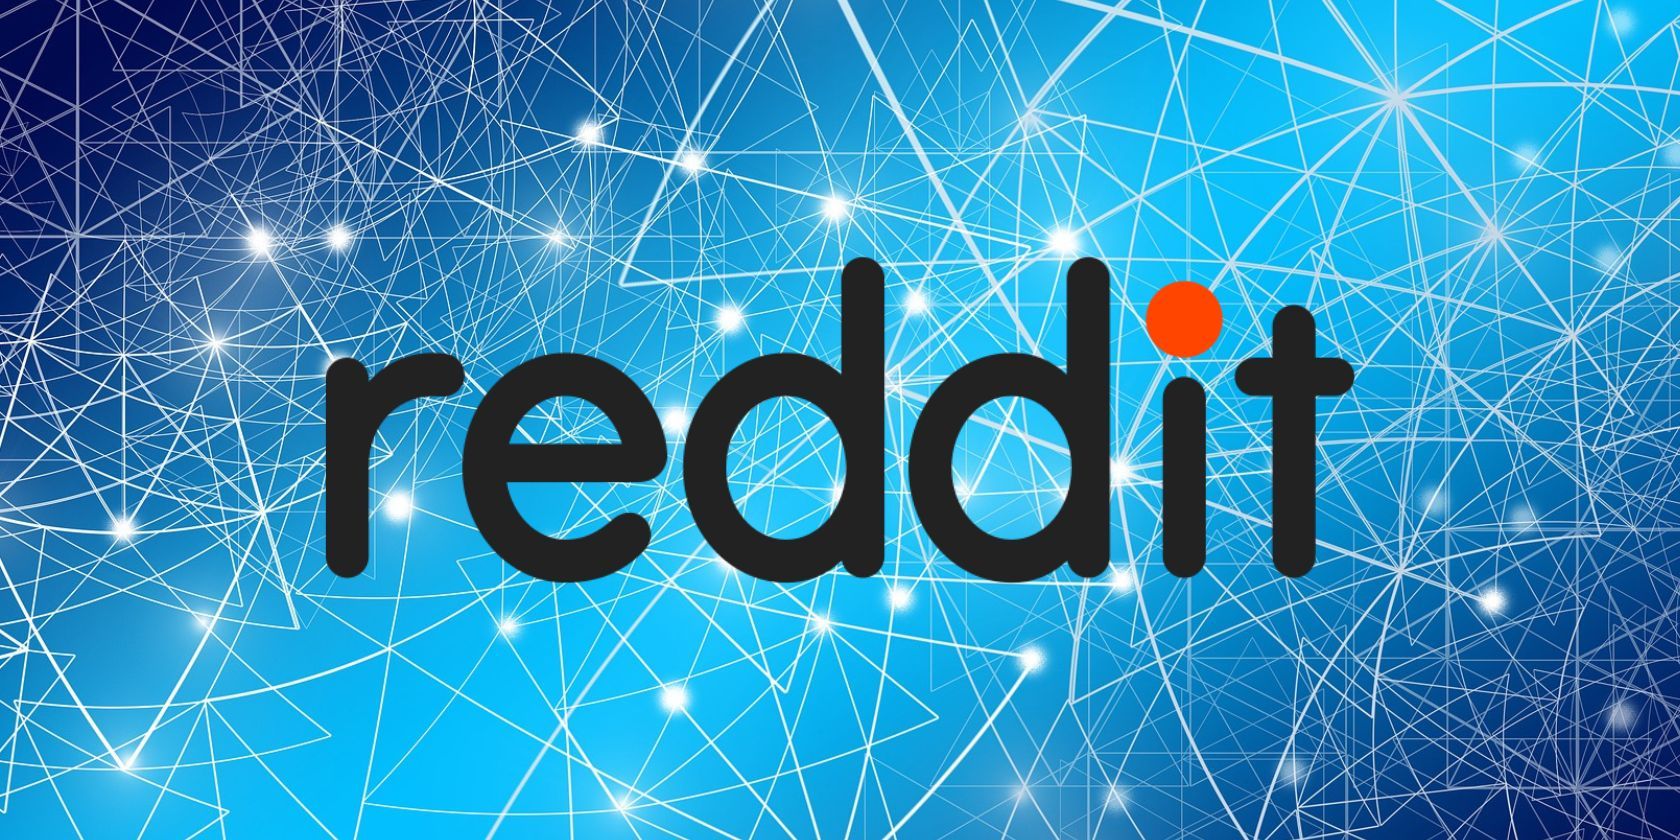 reddit logo in front of web network graphic